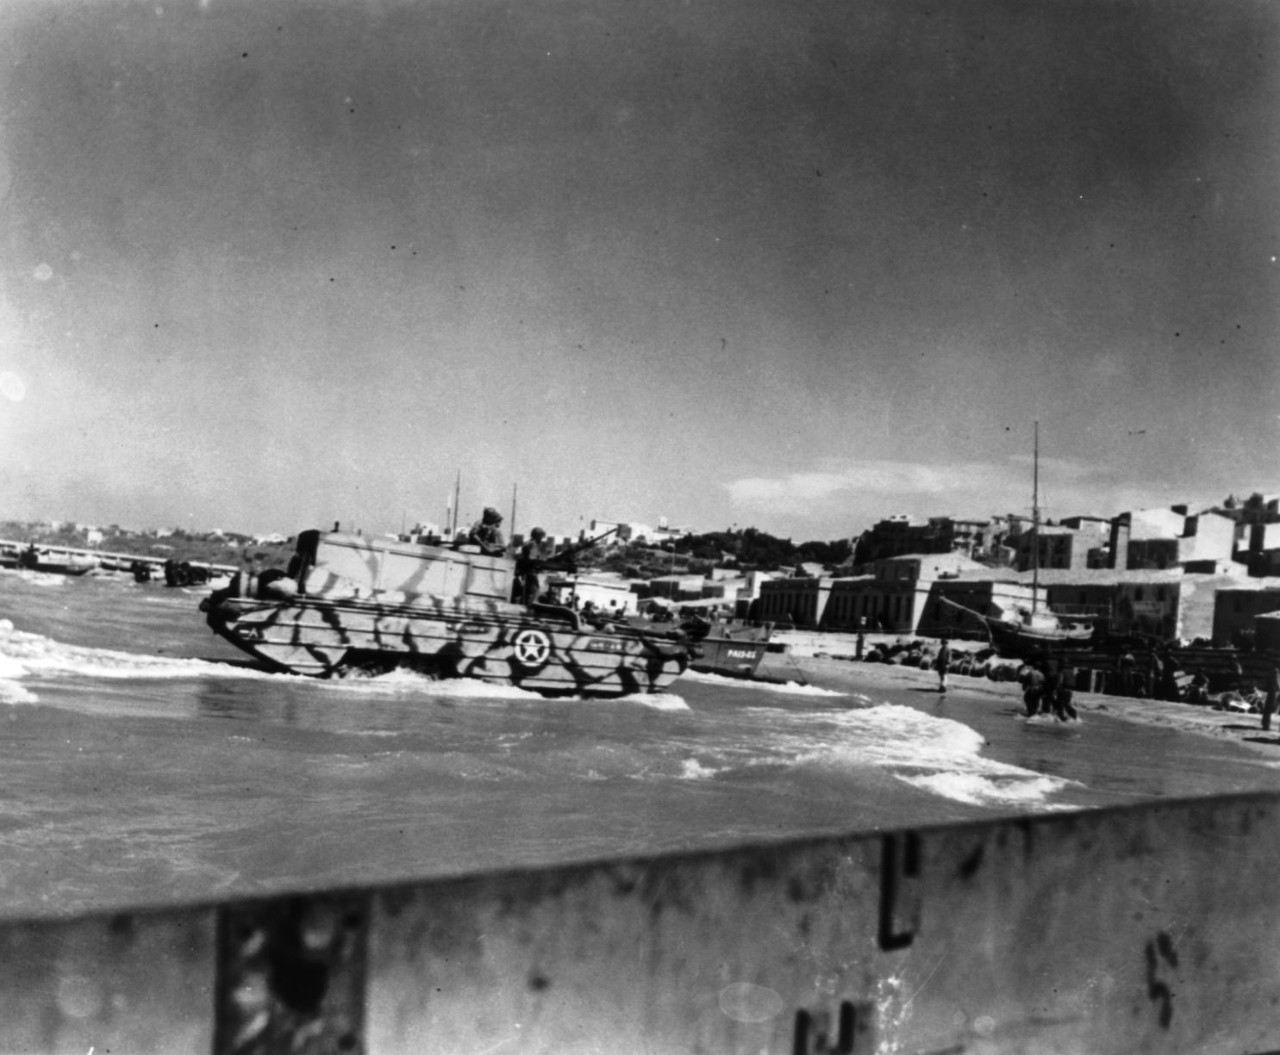 LC-USZ62-80656:  Invasion of Sicily, Italy, July 9 – August 17, 1943.   U.S. Army amphibious, DUKWs, roll ashore in Sicily as a Coast Guard-manned transport disgorges men and material for the invasion.  Coast Guardsmen and soldiers already on shore can be seen at right, July 1943.  (7/17/2015). 